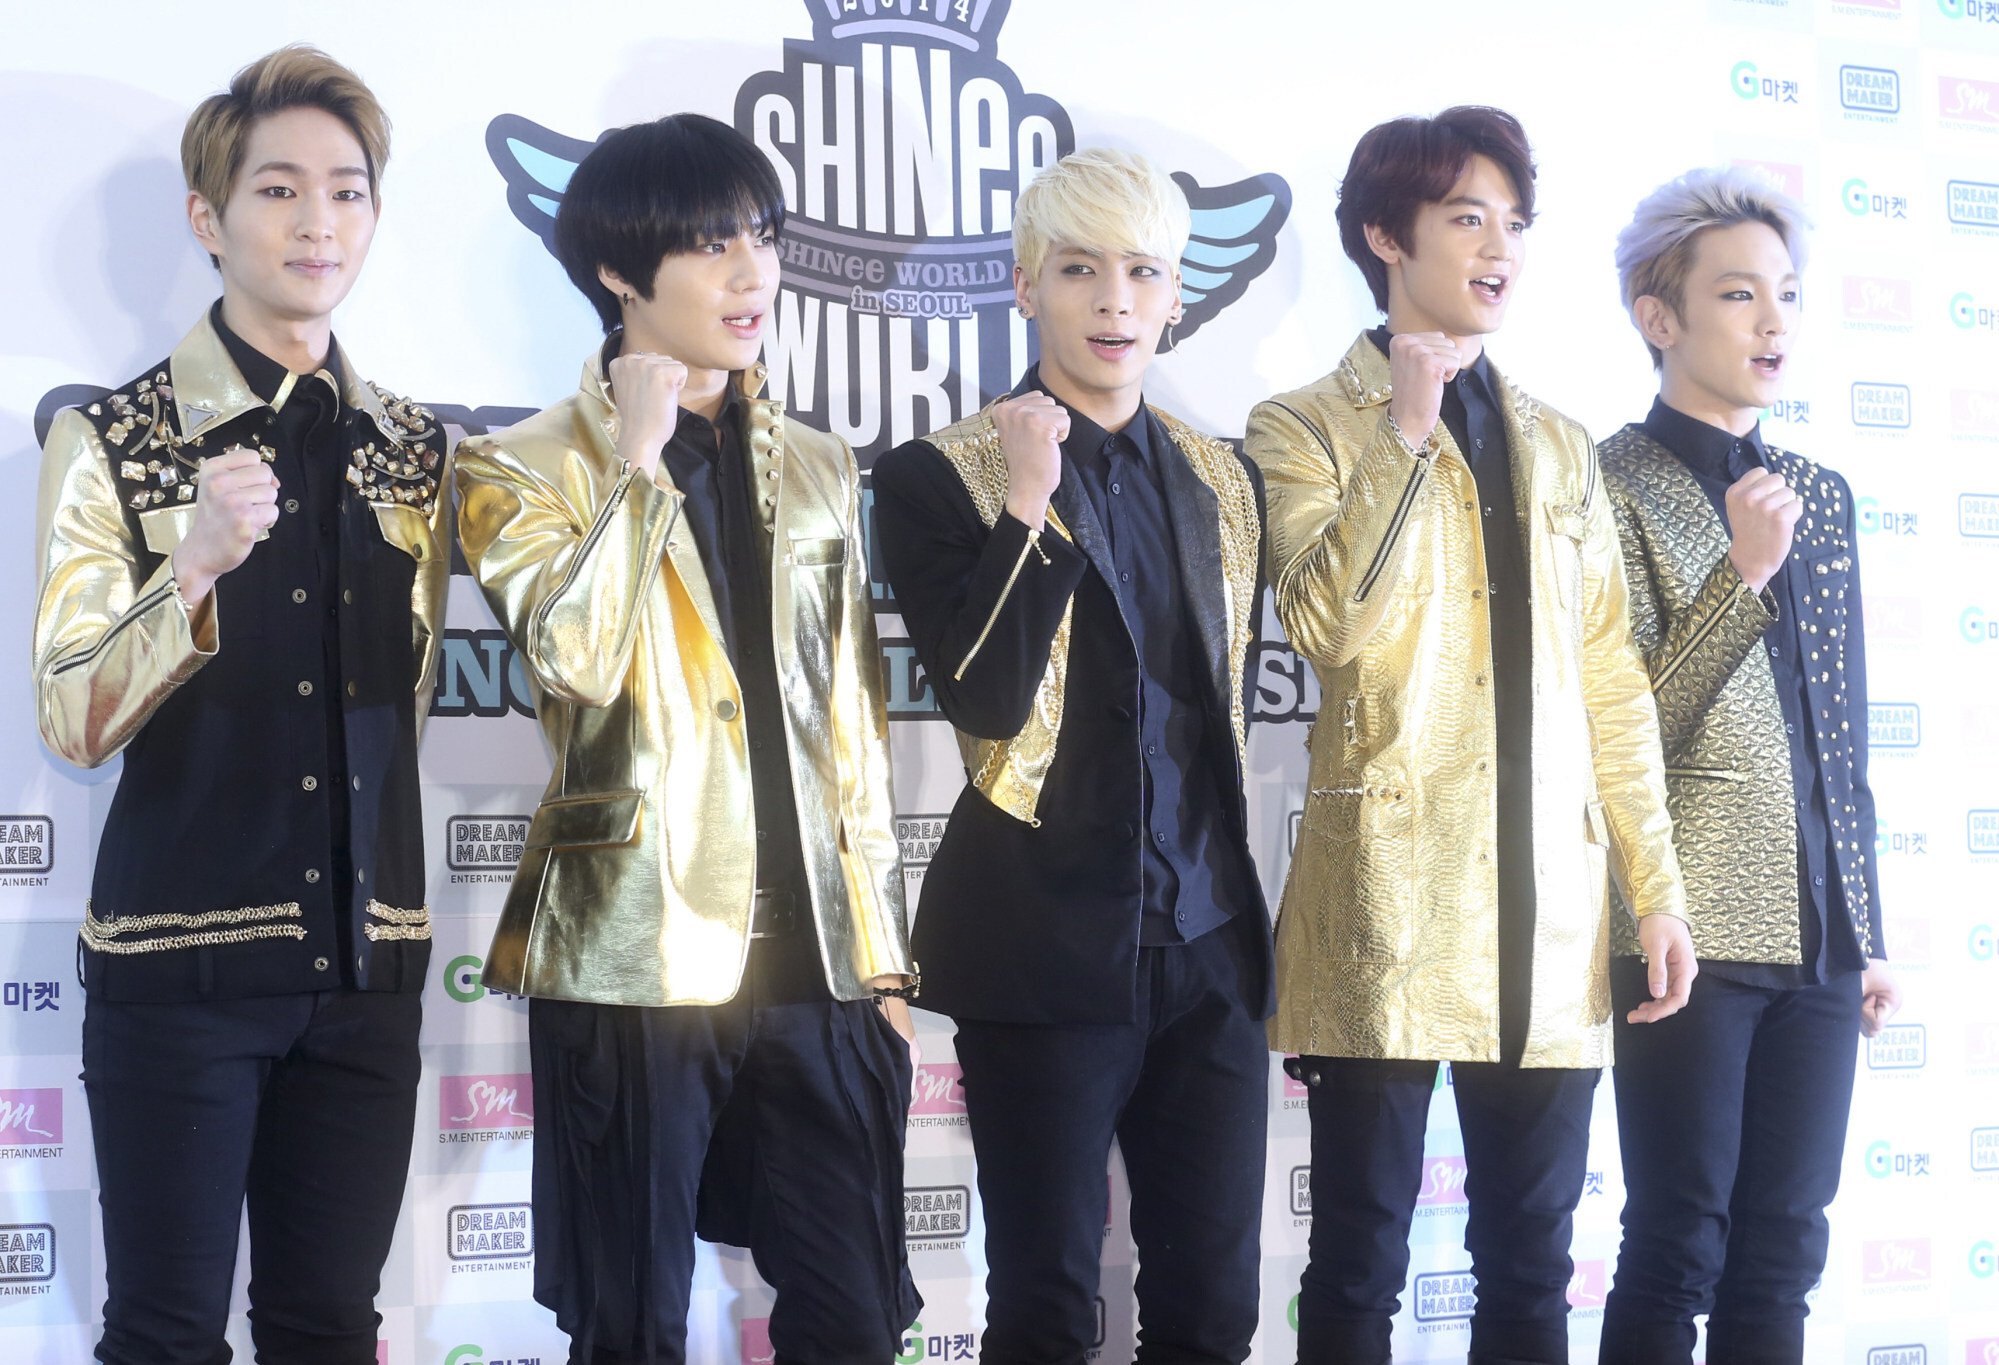 Shinee in 2014 before its Shinee World 3 concert in Seoul. Photo: AFP